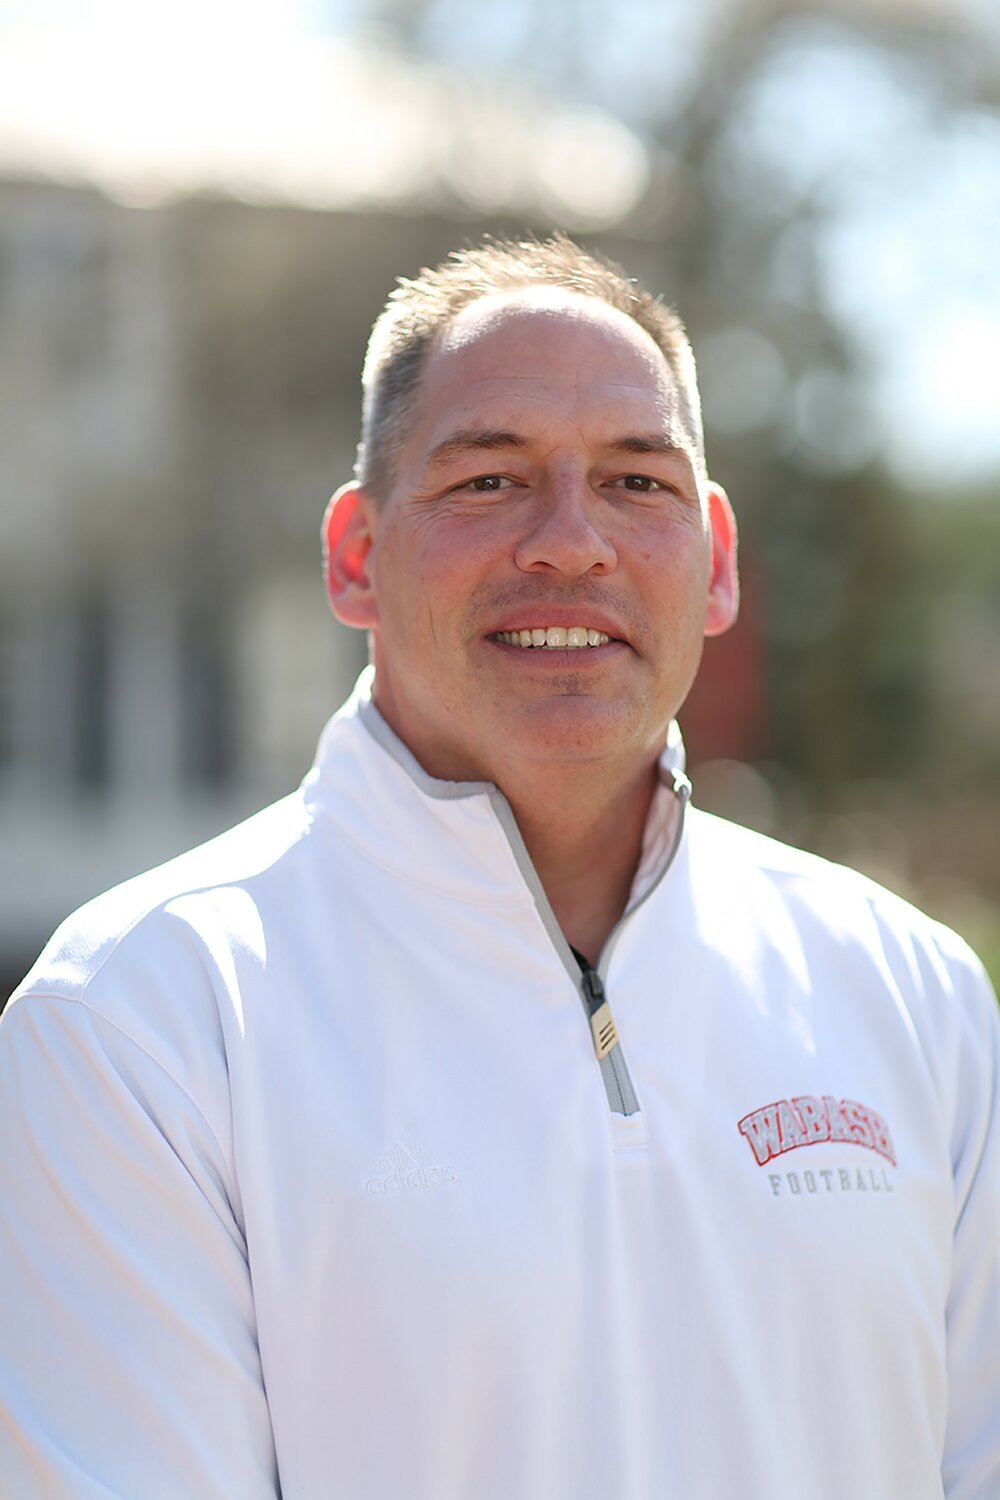 Jake Gilbert returns to Wabash College as he was named Associate Head Coach and defensive coordinator for the '24 season. Gilbert will replace Don Morel as Head Coach beginning in 2025.